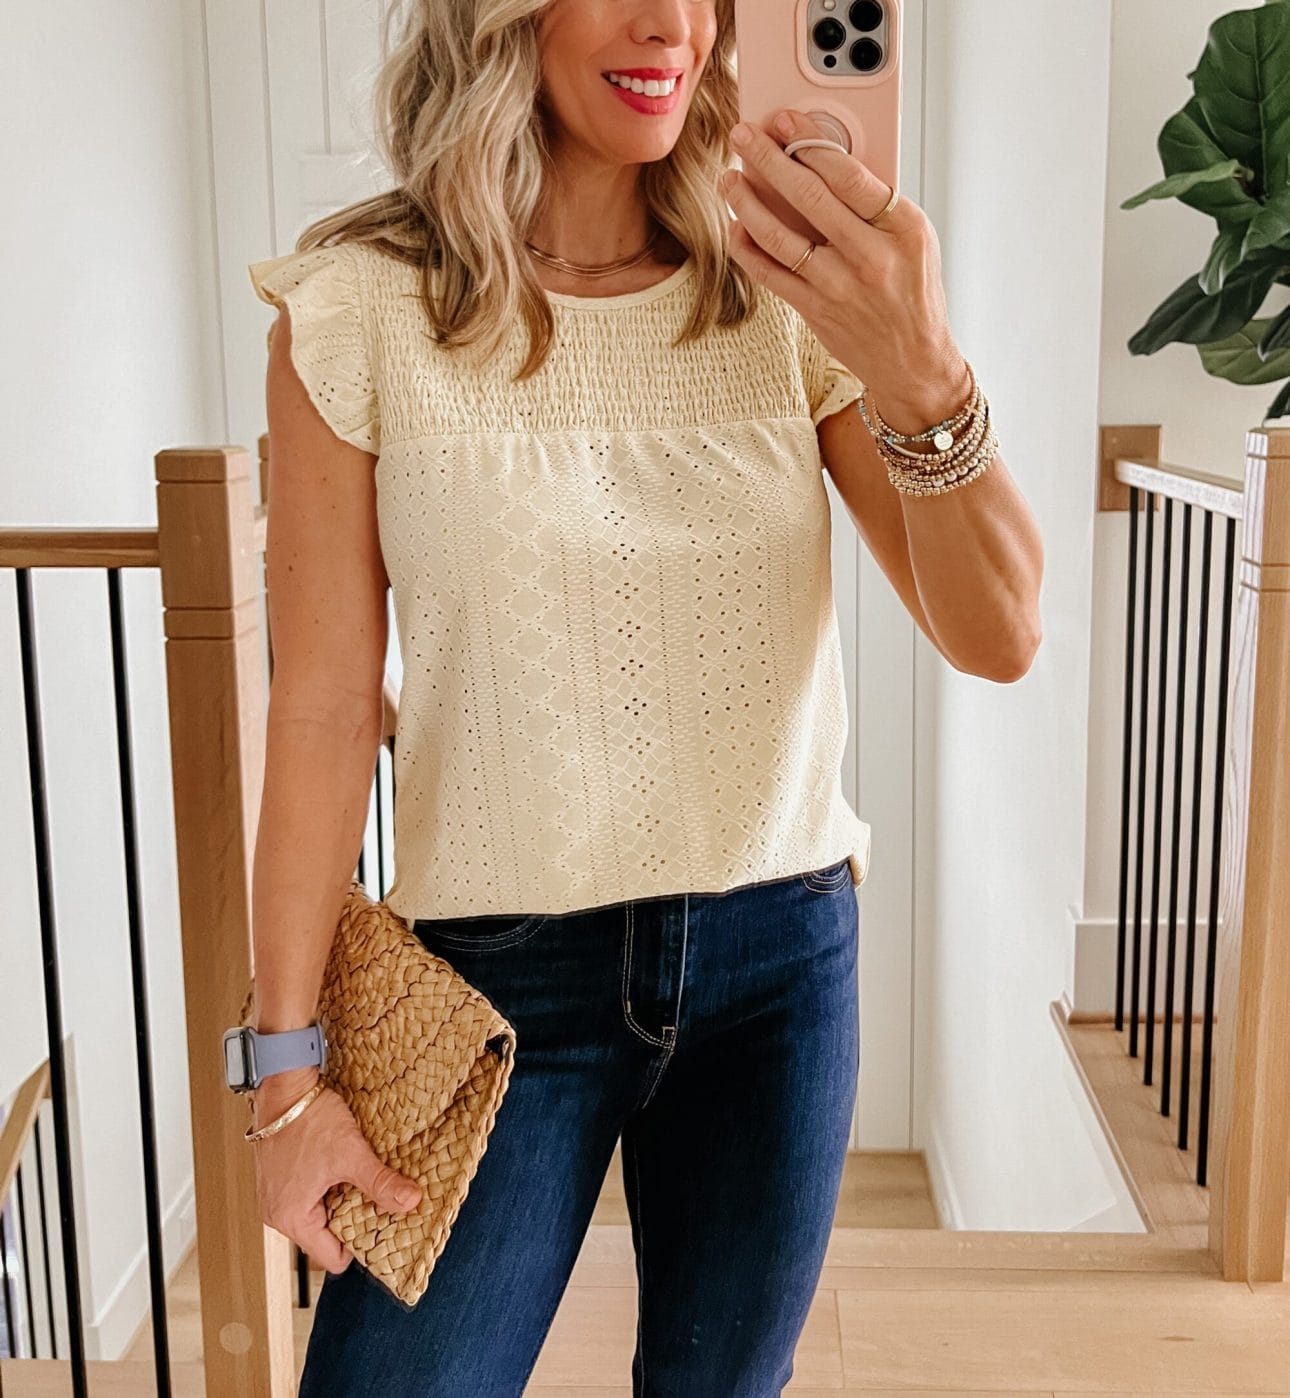 Eyelet Top, Jeans, Wedges, Clutch 